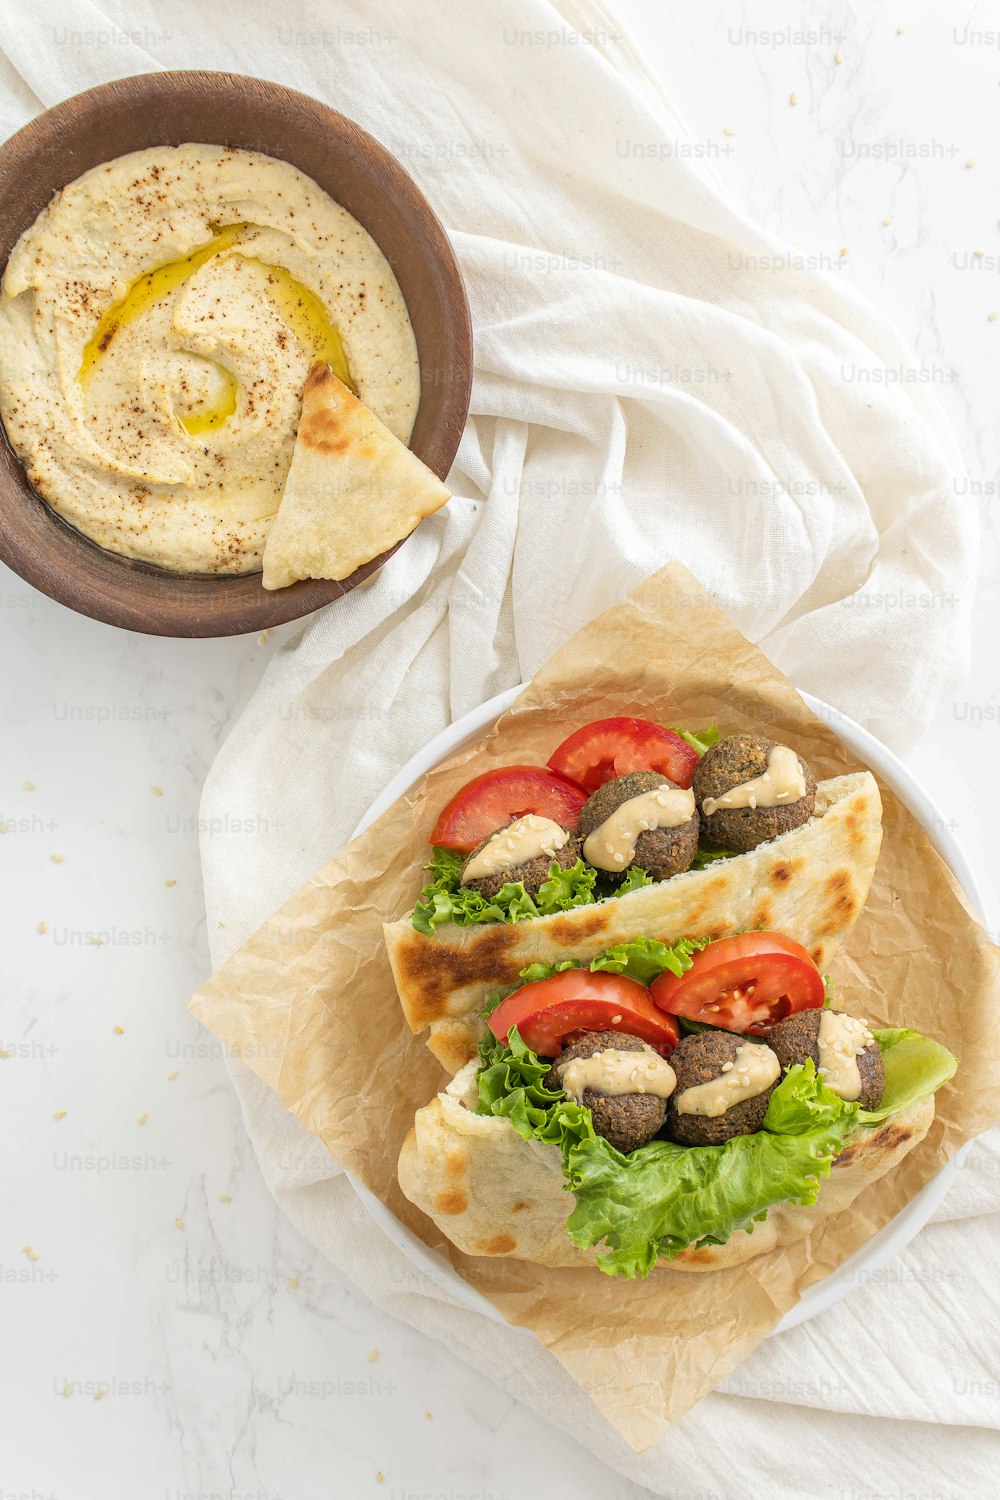 a plate of food with pita bread and a bowl of hummus